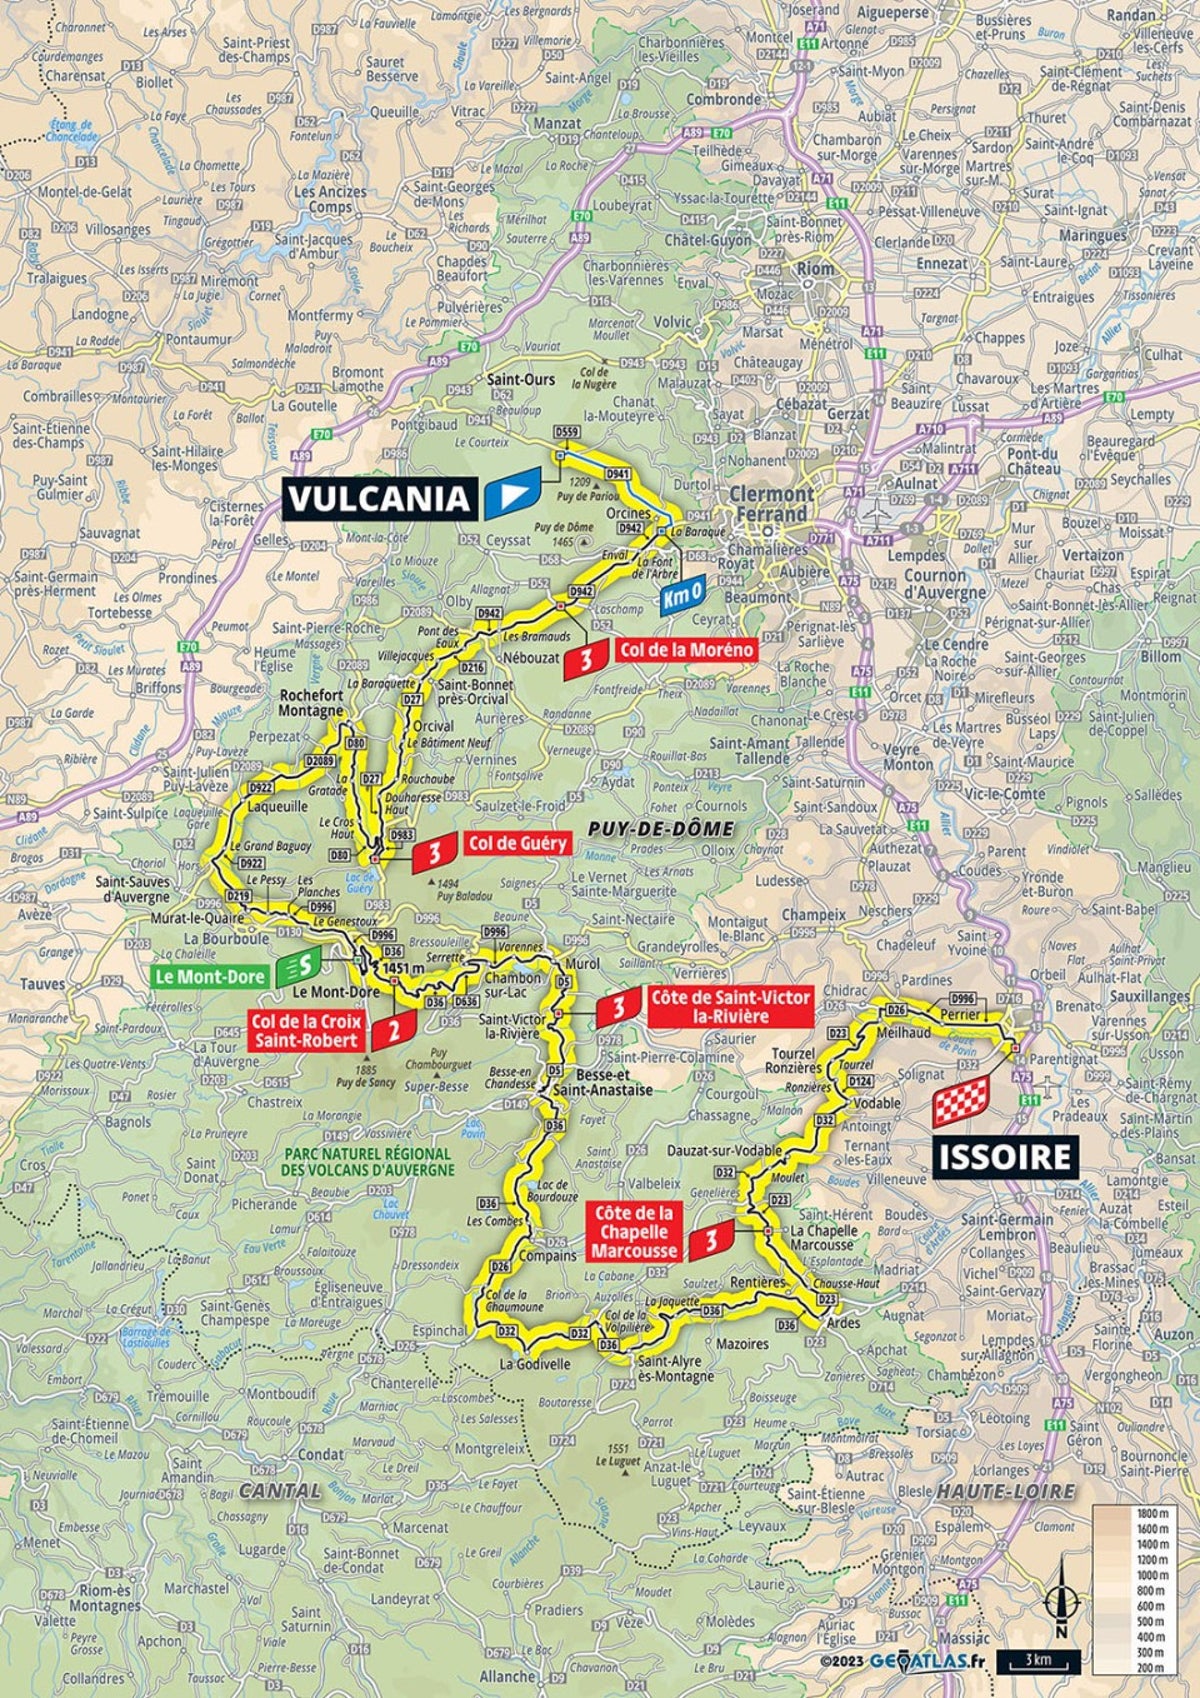 Tour de France 2023 stage 10 preview: Route map and profile of 145km from Parc Vulcania to Issoire